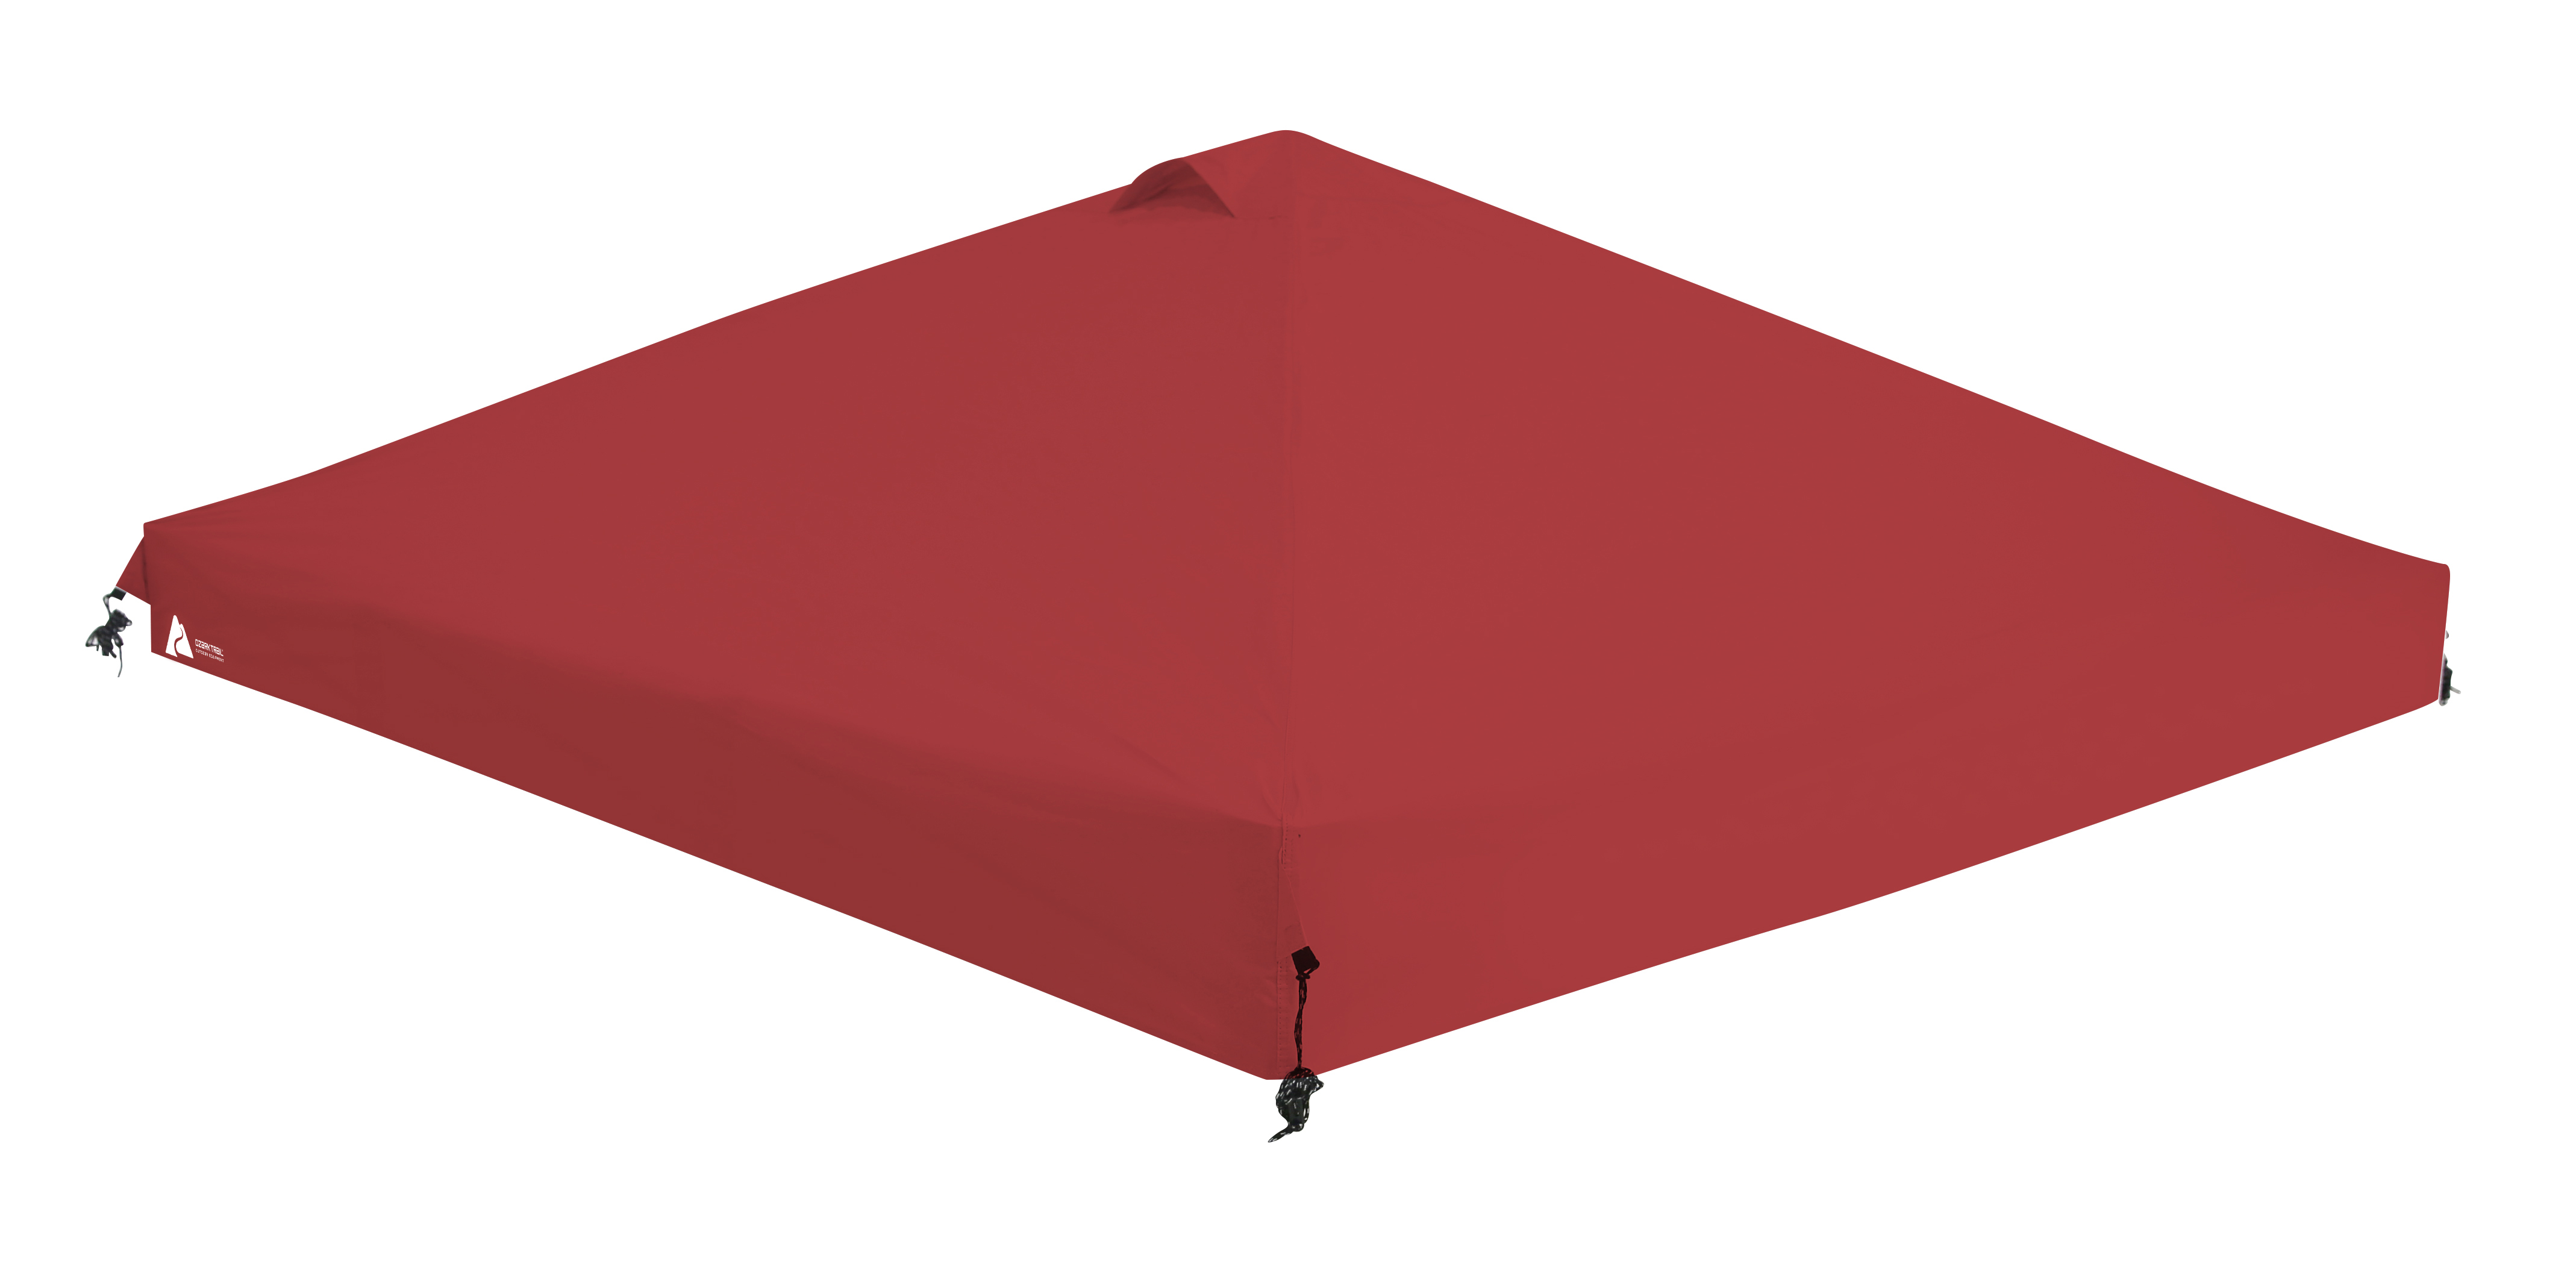 Ozark Trail 10' x 10' Top Replacement Cover for outdoor canopy, Red - image 4 of 7